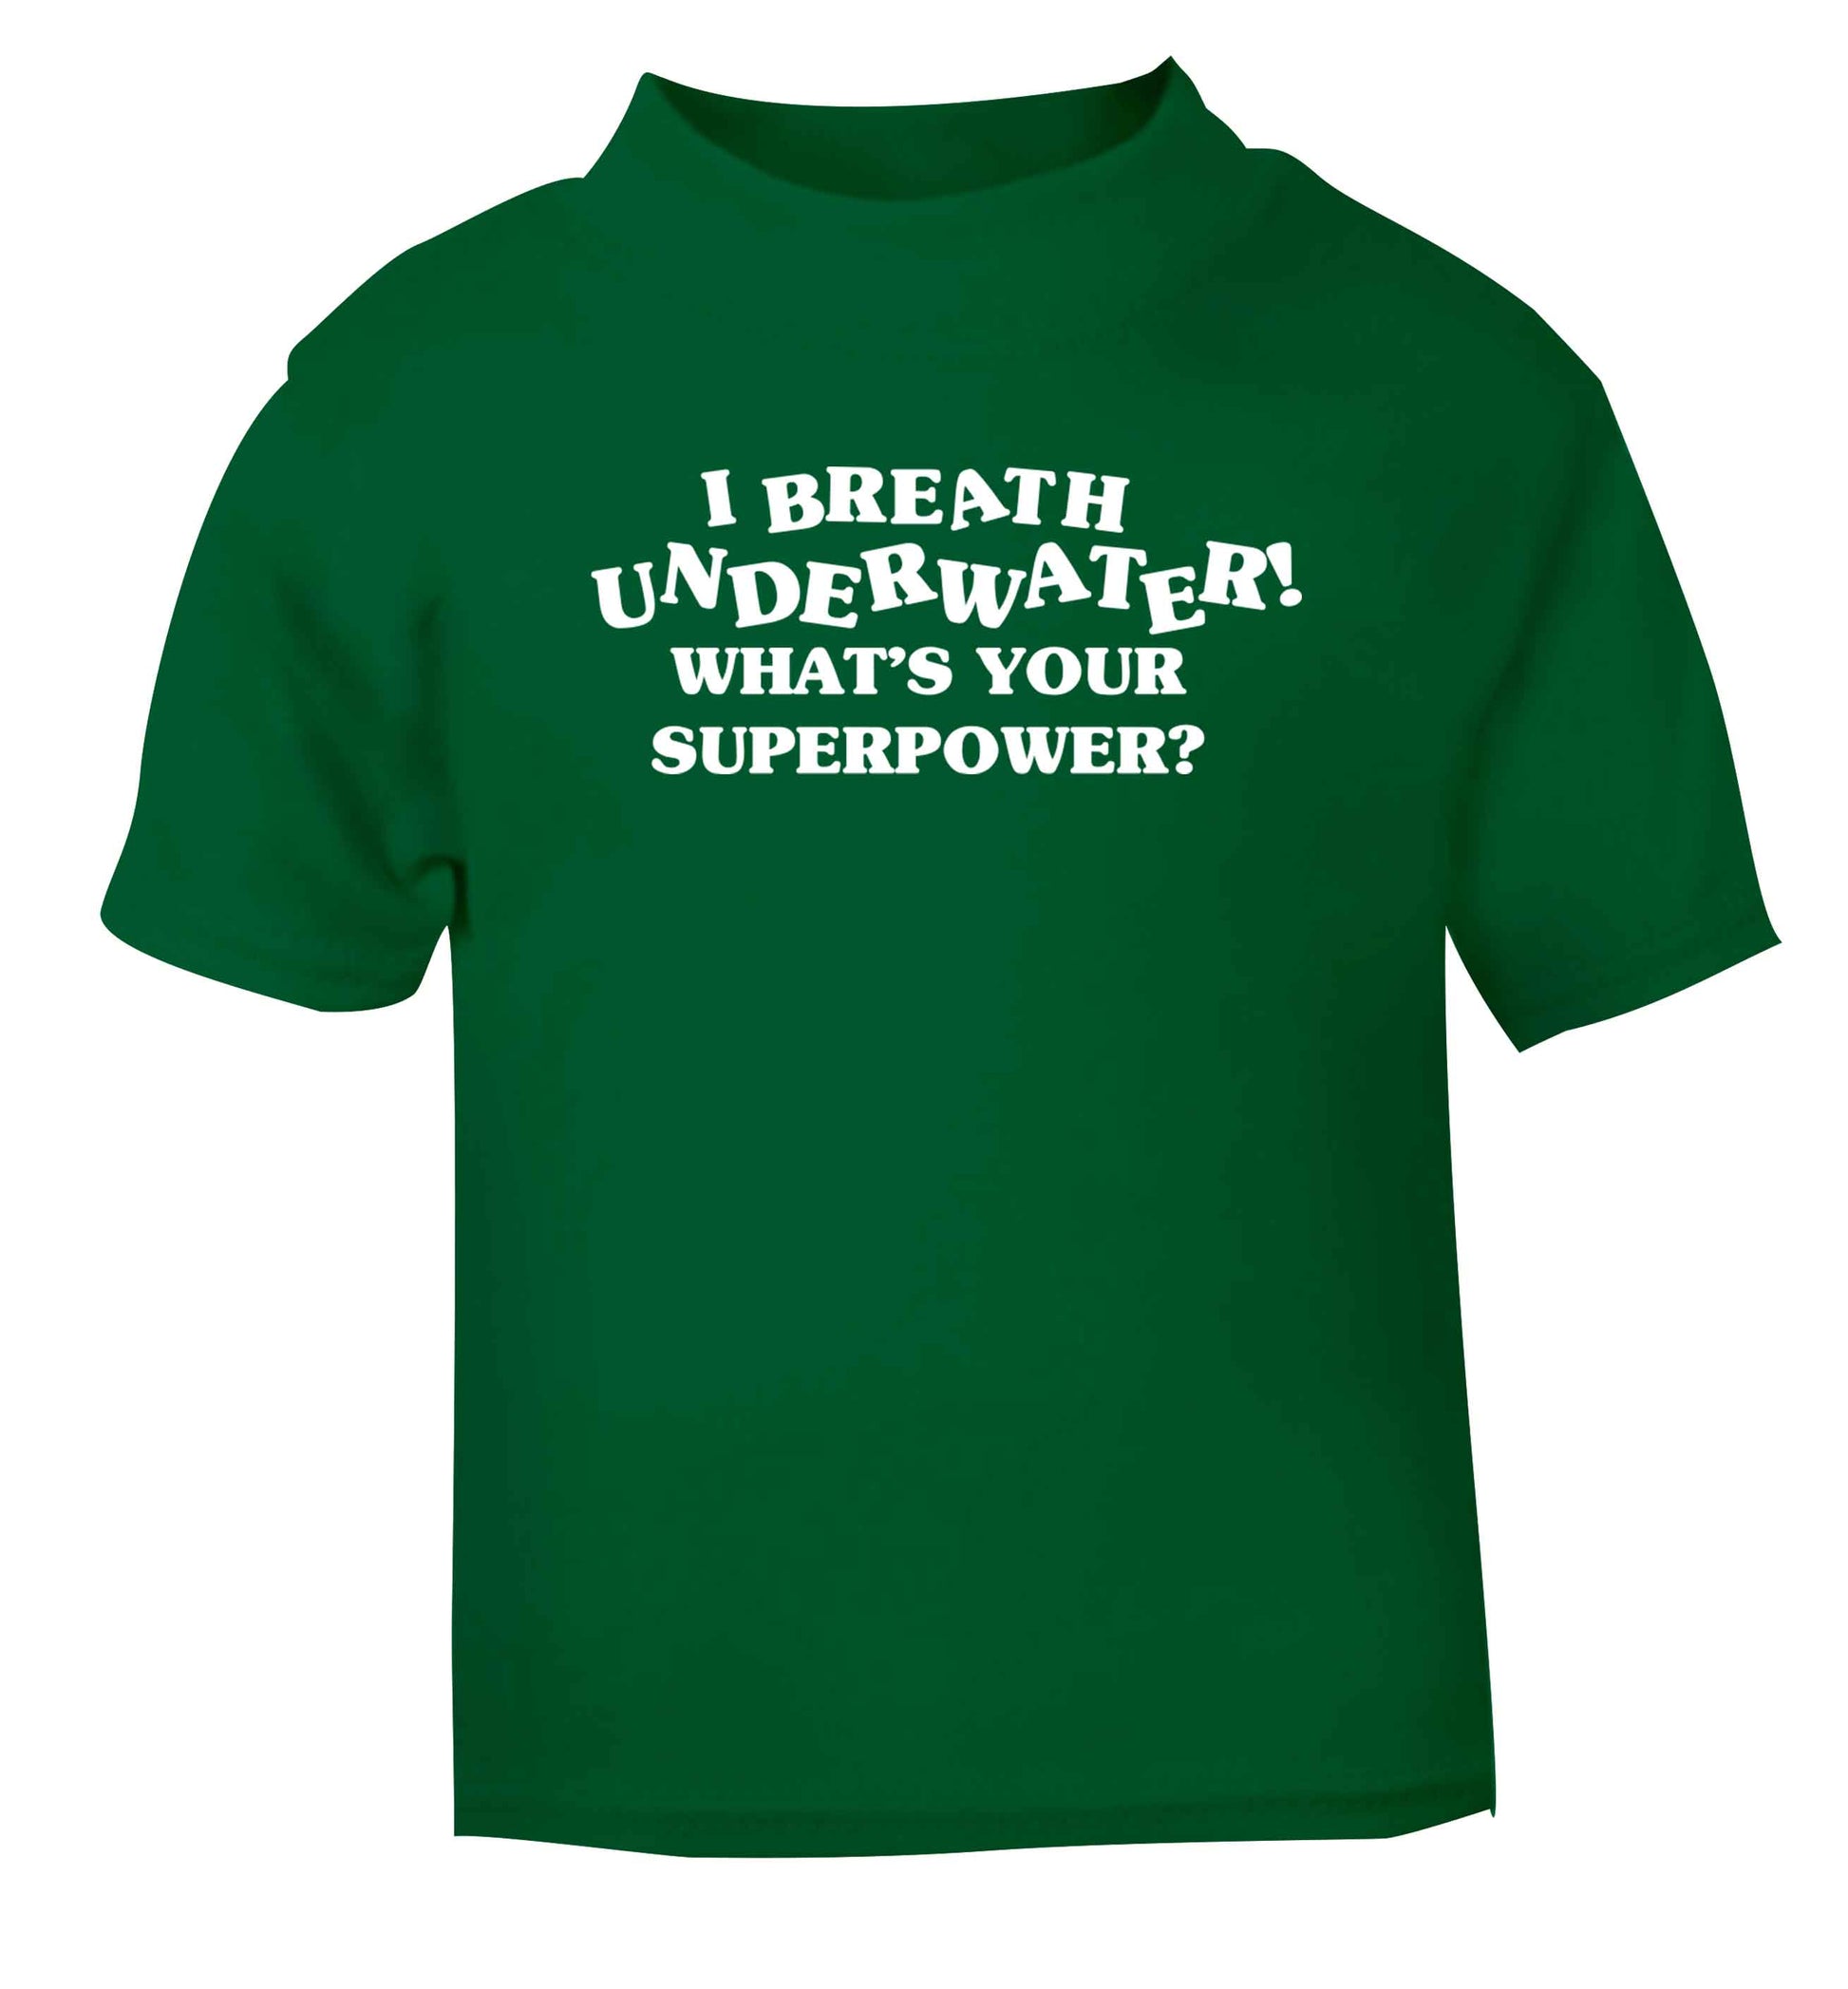 I breath underwater what's your superpower? green Baby Toddler Tshirt 2 Years